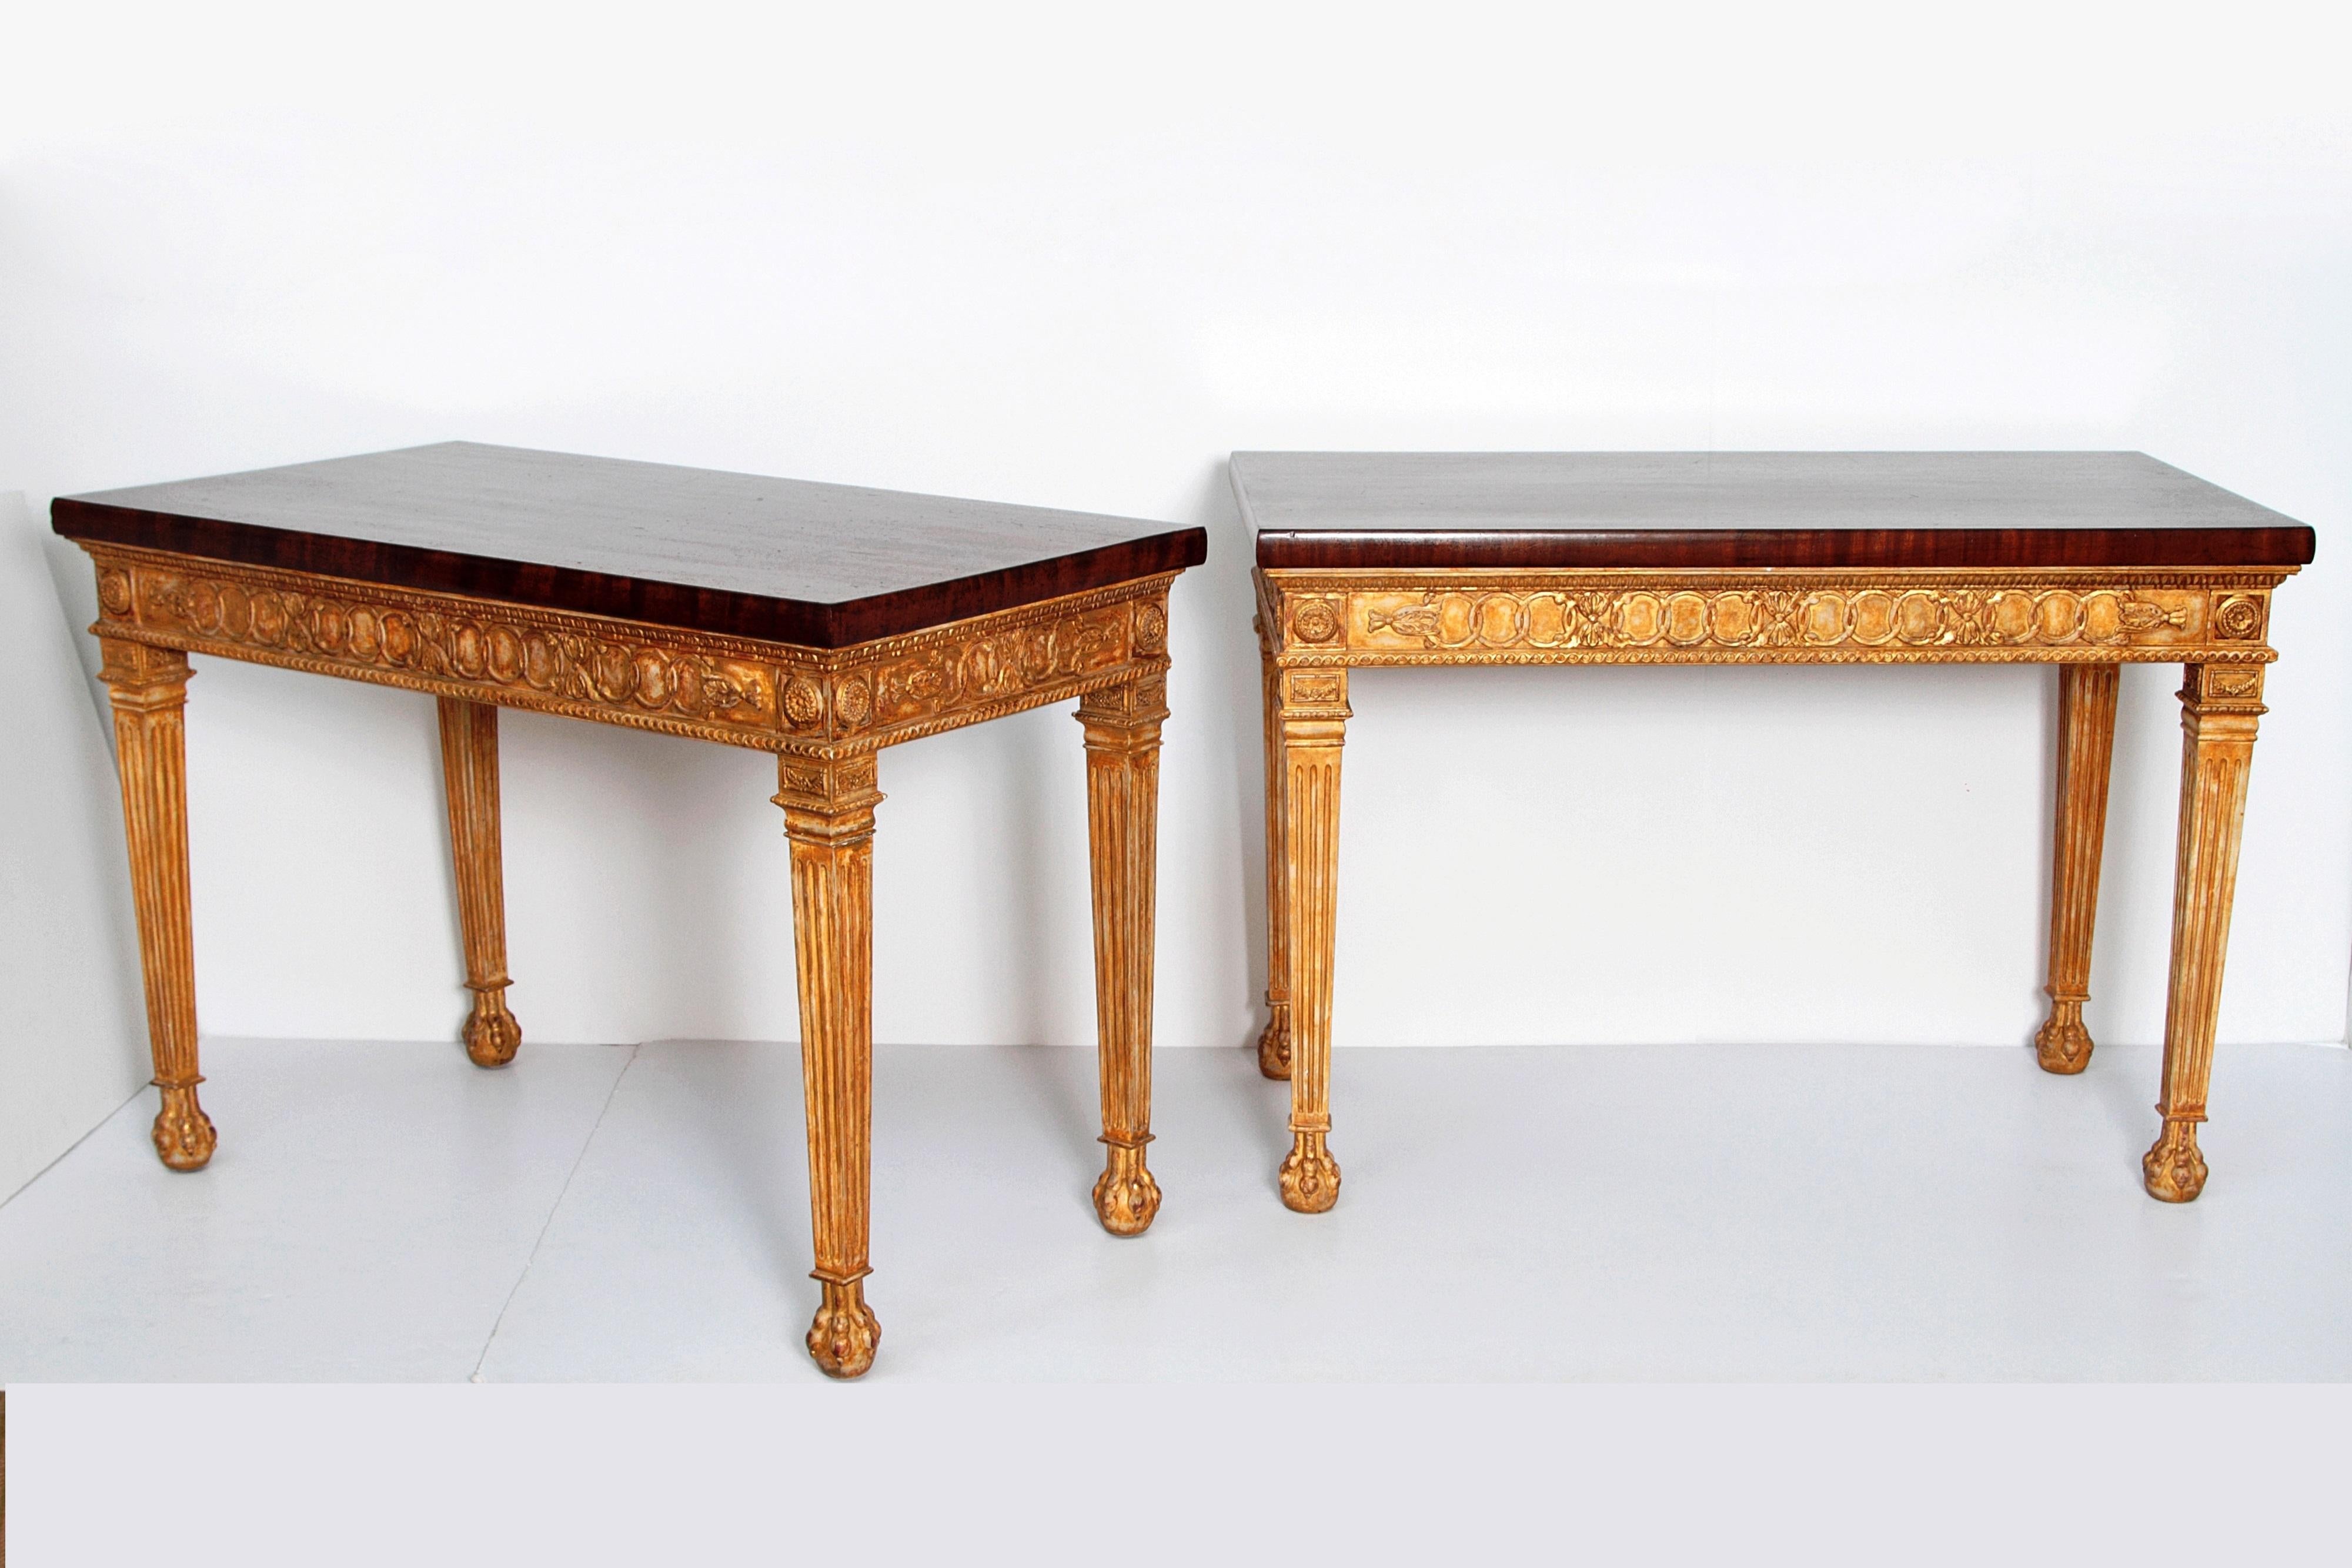 English George III-Style Giltwood and Mahogany Console Tables / Pair